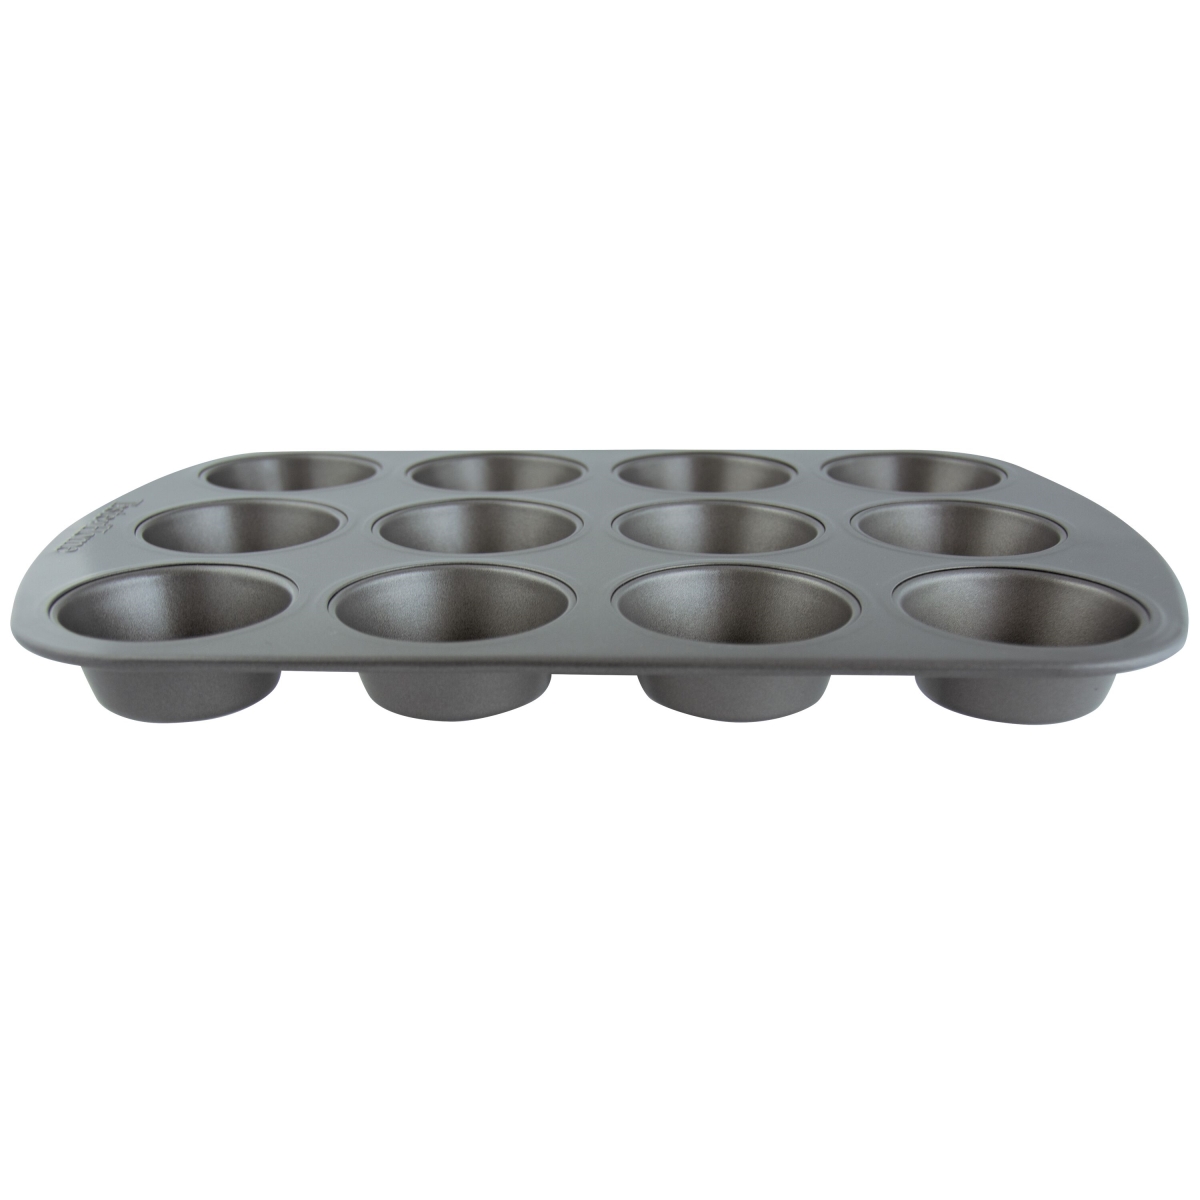 Picture of Range Kleen TN122G 12-Cup Taste of Home Non-Stick Metal Muffin Pan